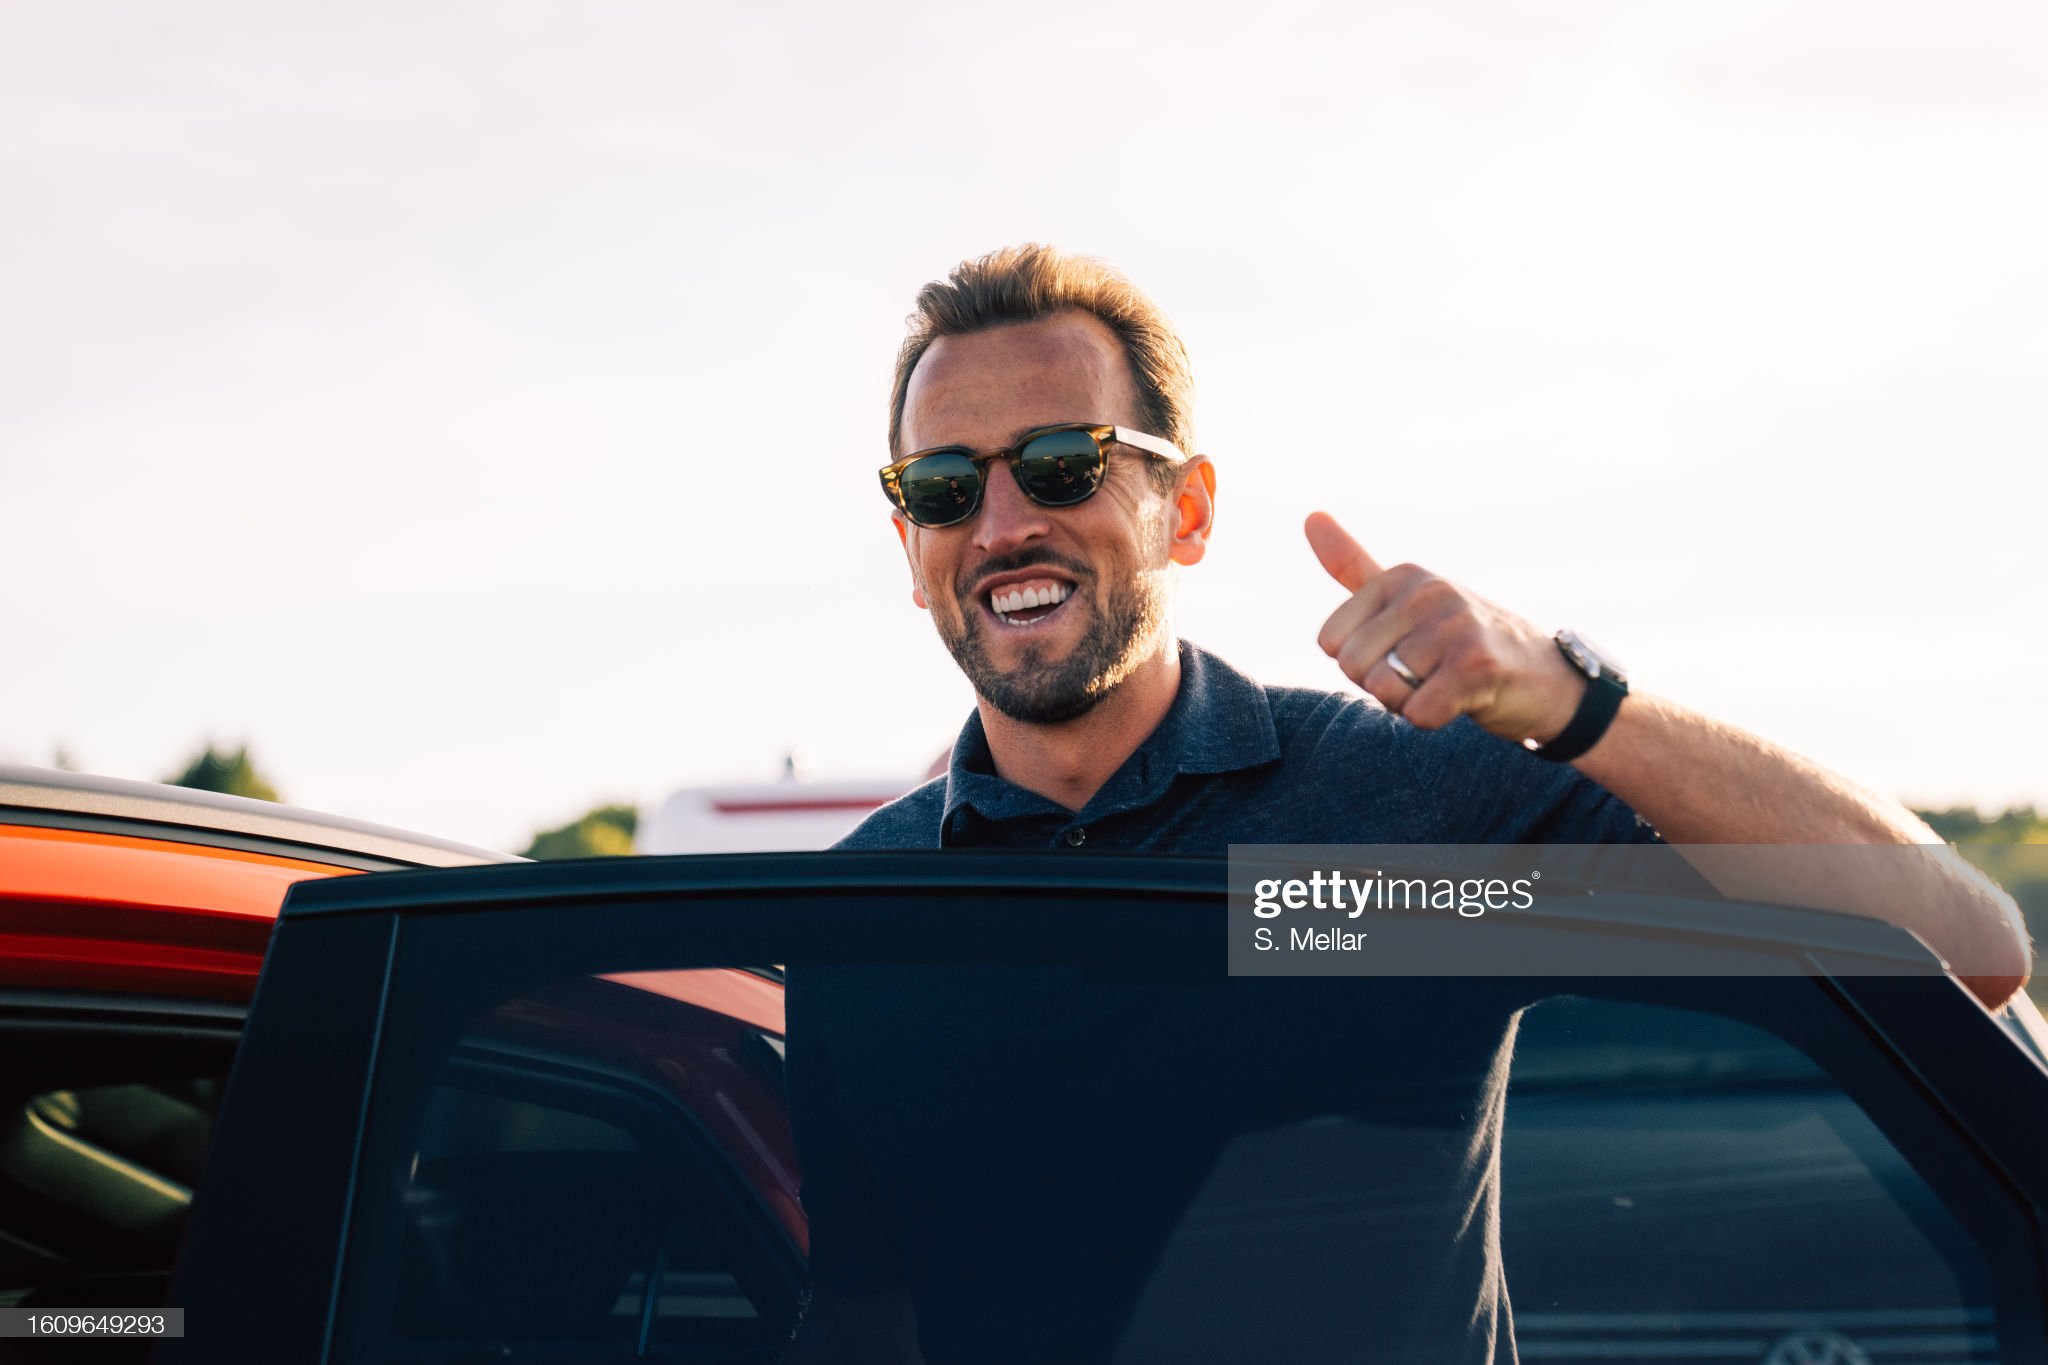 gettyimages-1609649293-2048x2048.jpg